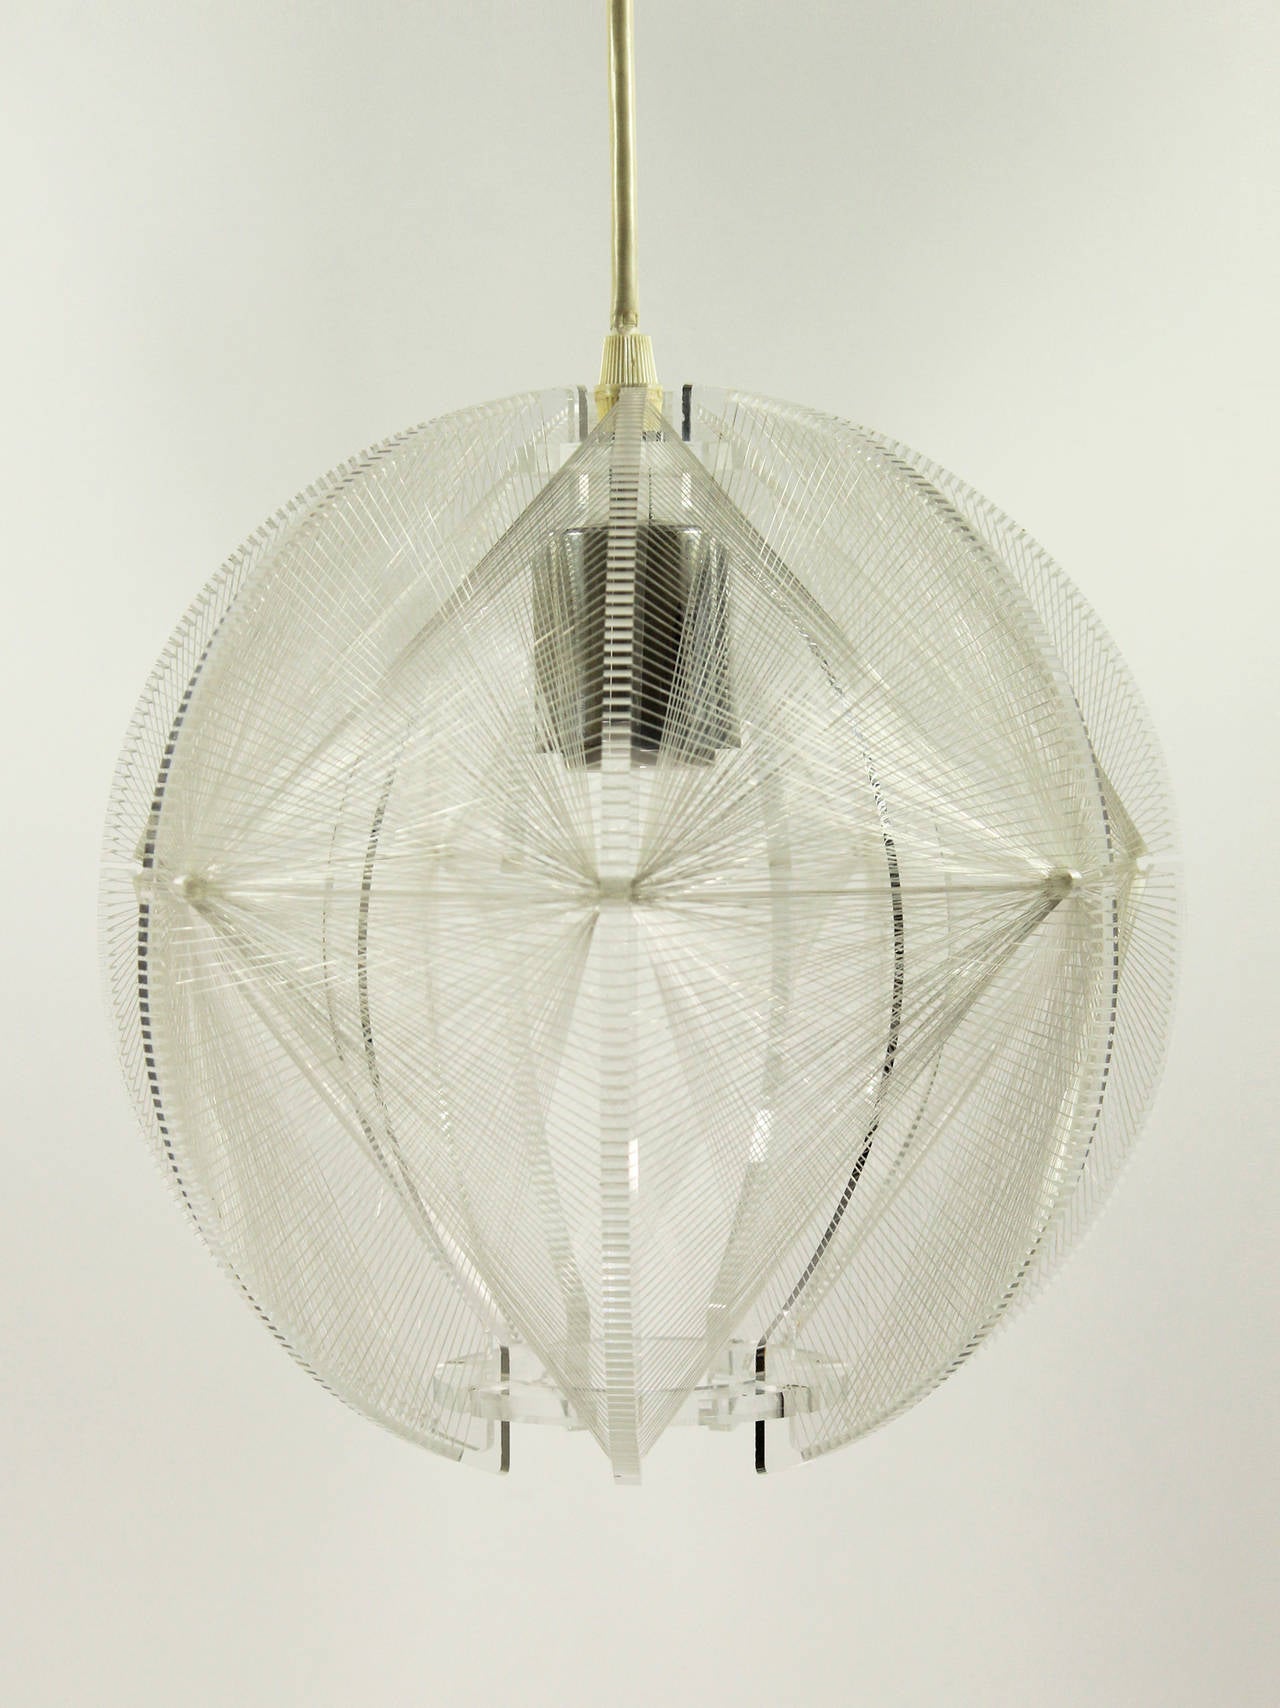 This dazzling 1970s pendant from West Germany consists of a round Lucite frame with seven protruding notched fins that are intricately interwoven with nylon string. Fixture comes with a ceiling canopy and a light bulb of the correct size and shape.